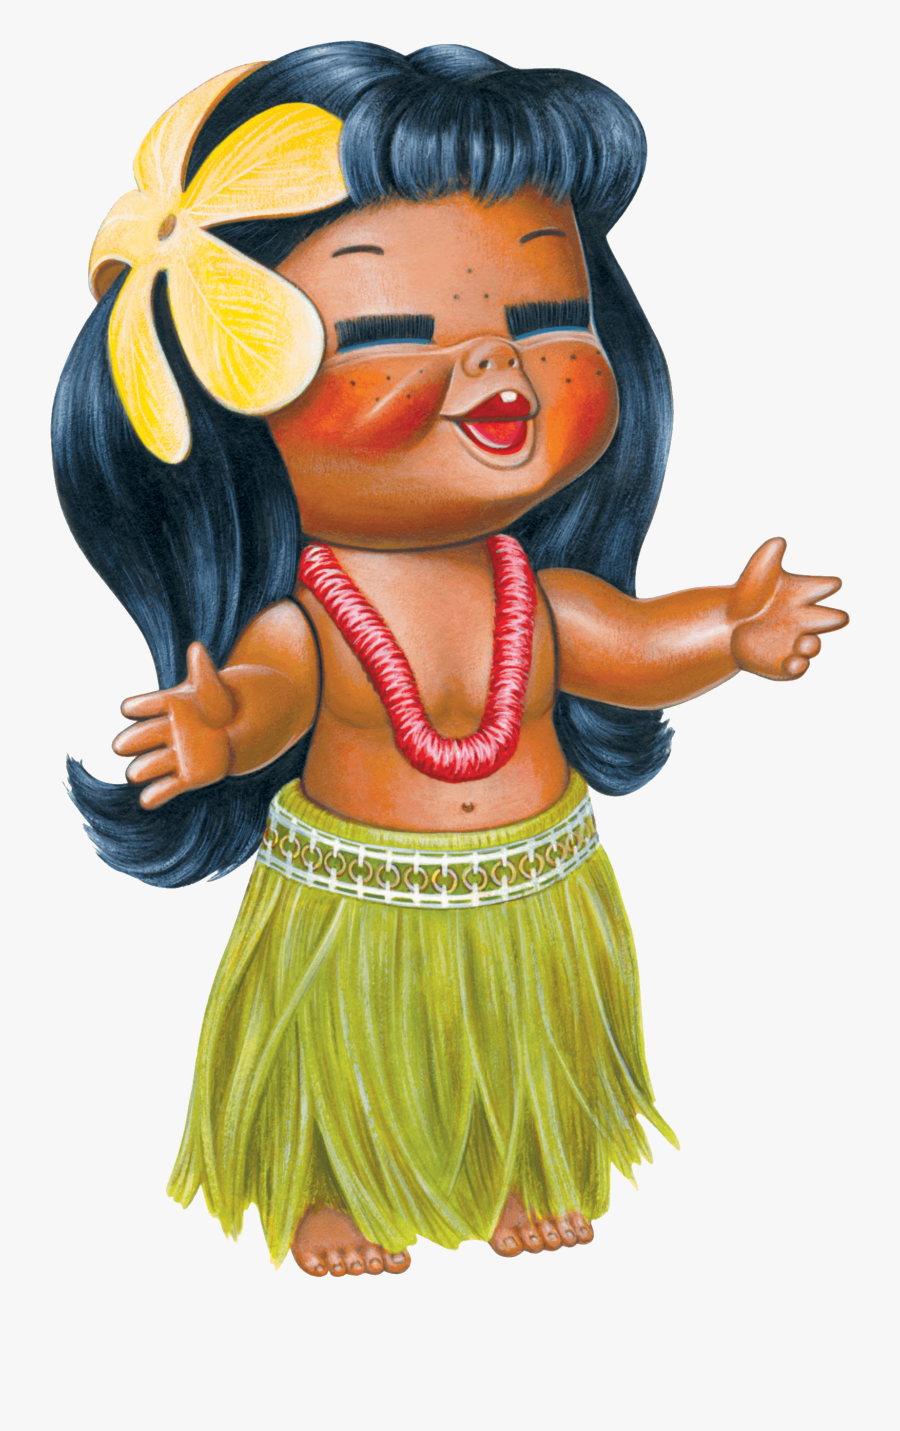 June Foray On The Comedy - Hula Girl Png, Transparent Clipart